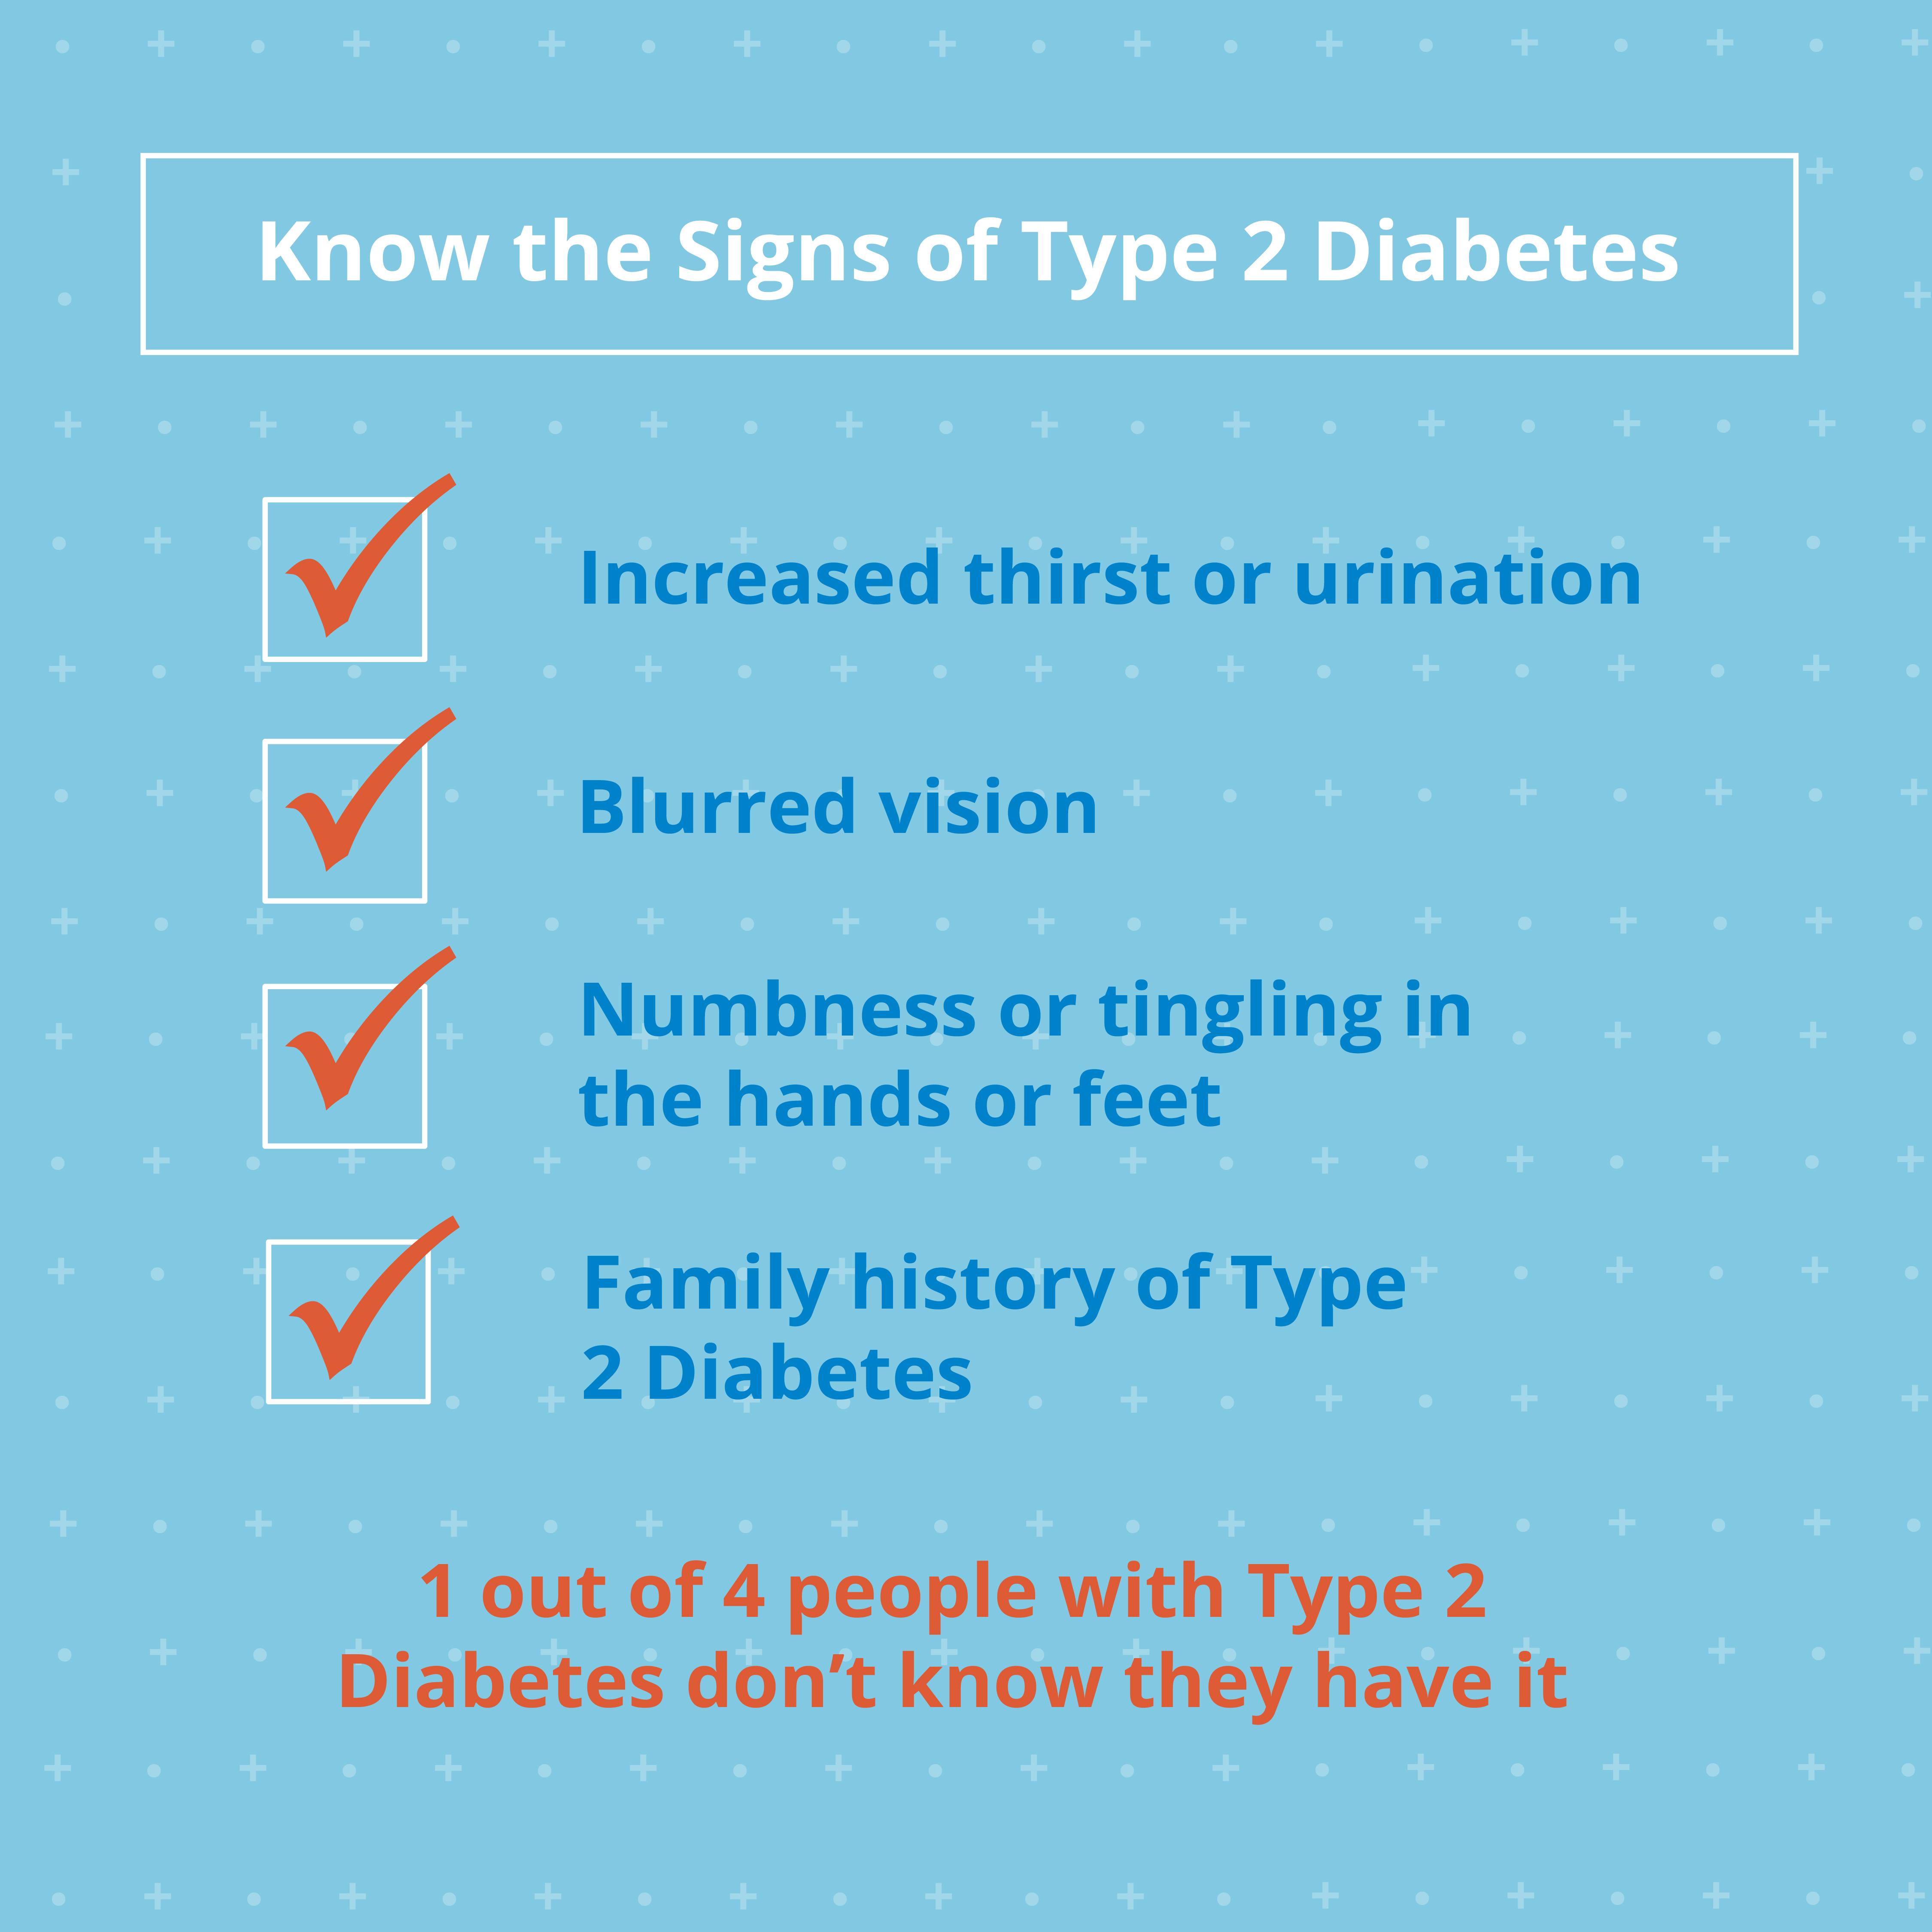 Know the signs of type 2 diabetes: increased thirst or urination, blurred vision, numbness in hands or feet, family history of type 2 diabetes